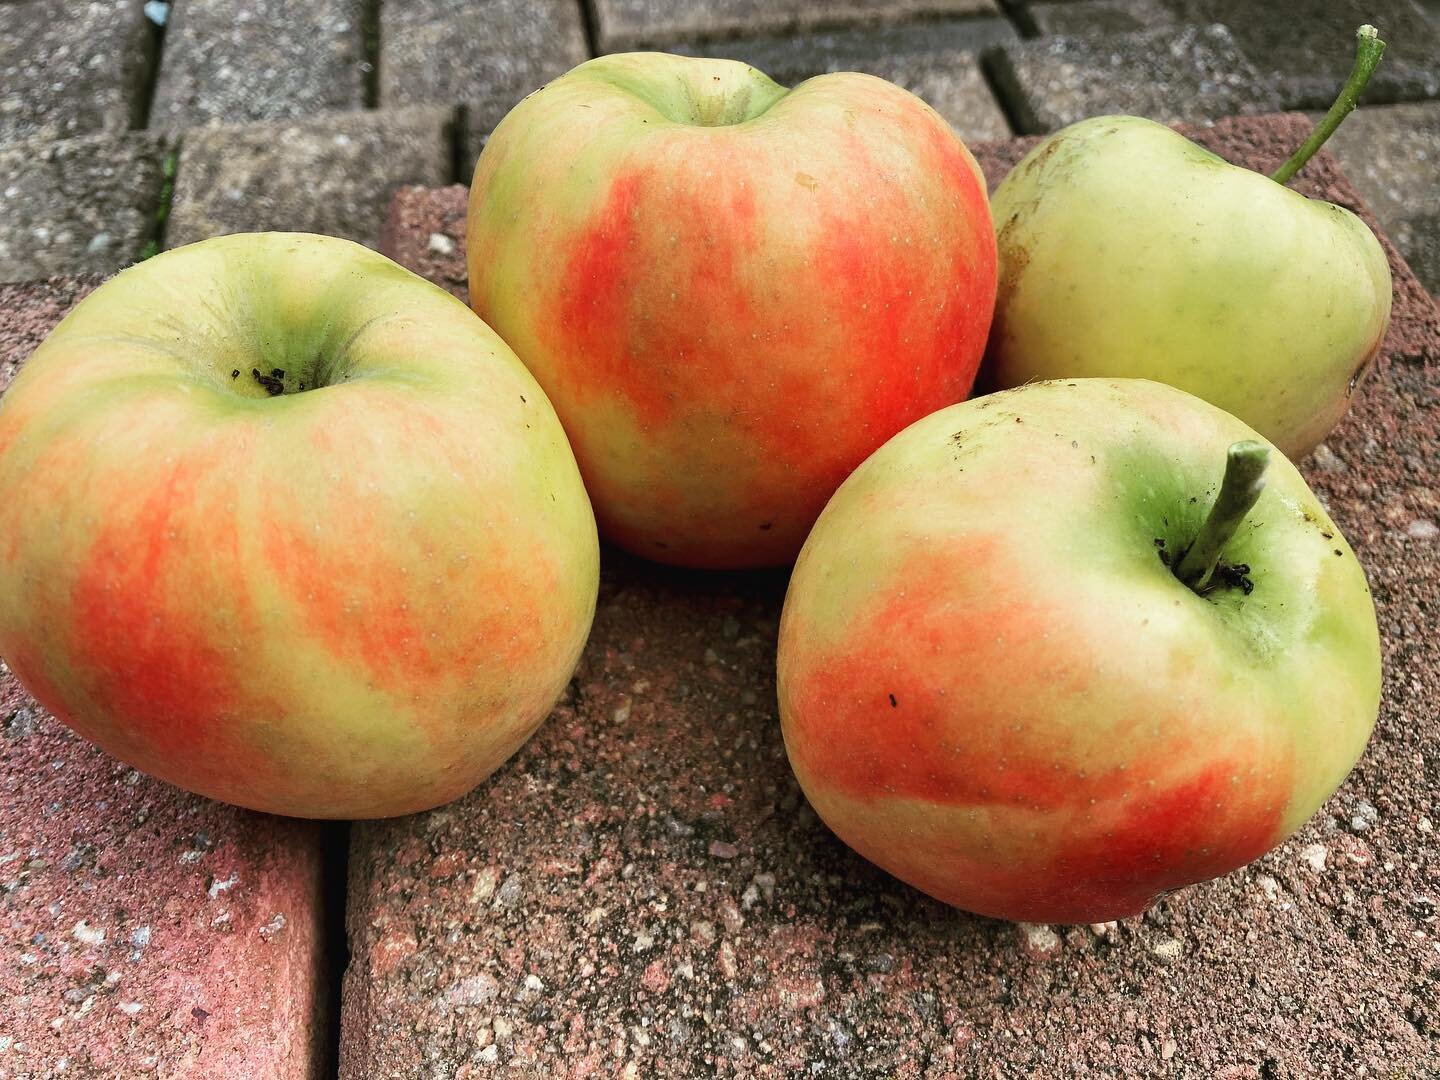 The last of my apples harvested.

Grateful of being able to grow my own fruit and veggies, despite it being a struggle at times.

But in those instances, I guess the birds make sure things don&rsquo;t go to waste!!

#homegrown #applesfresh #gardening